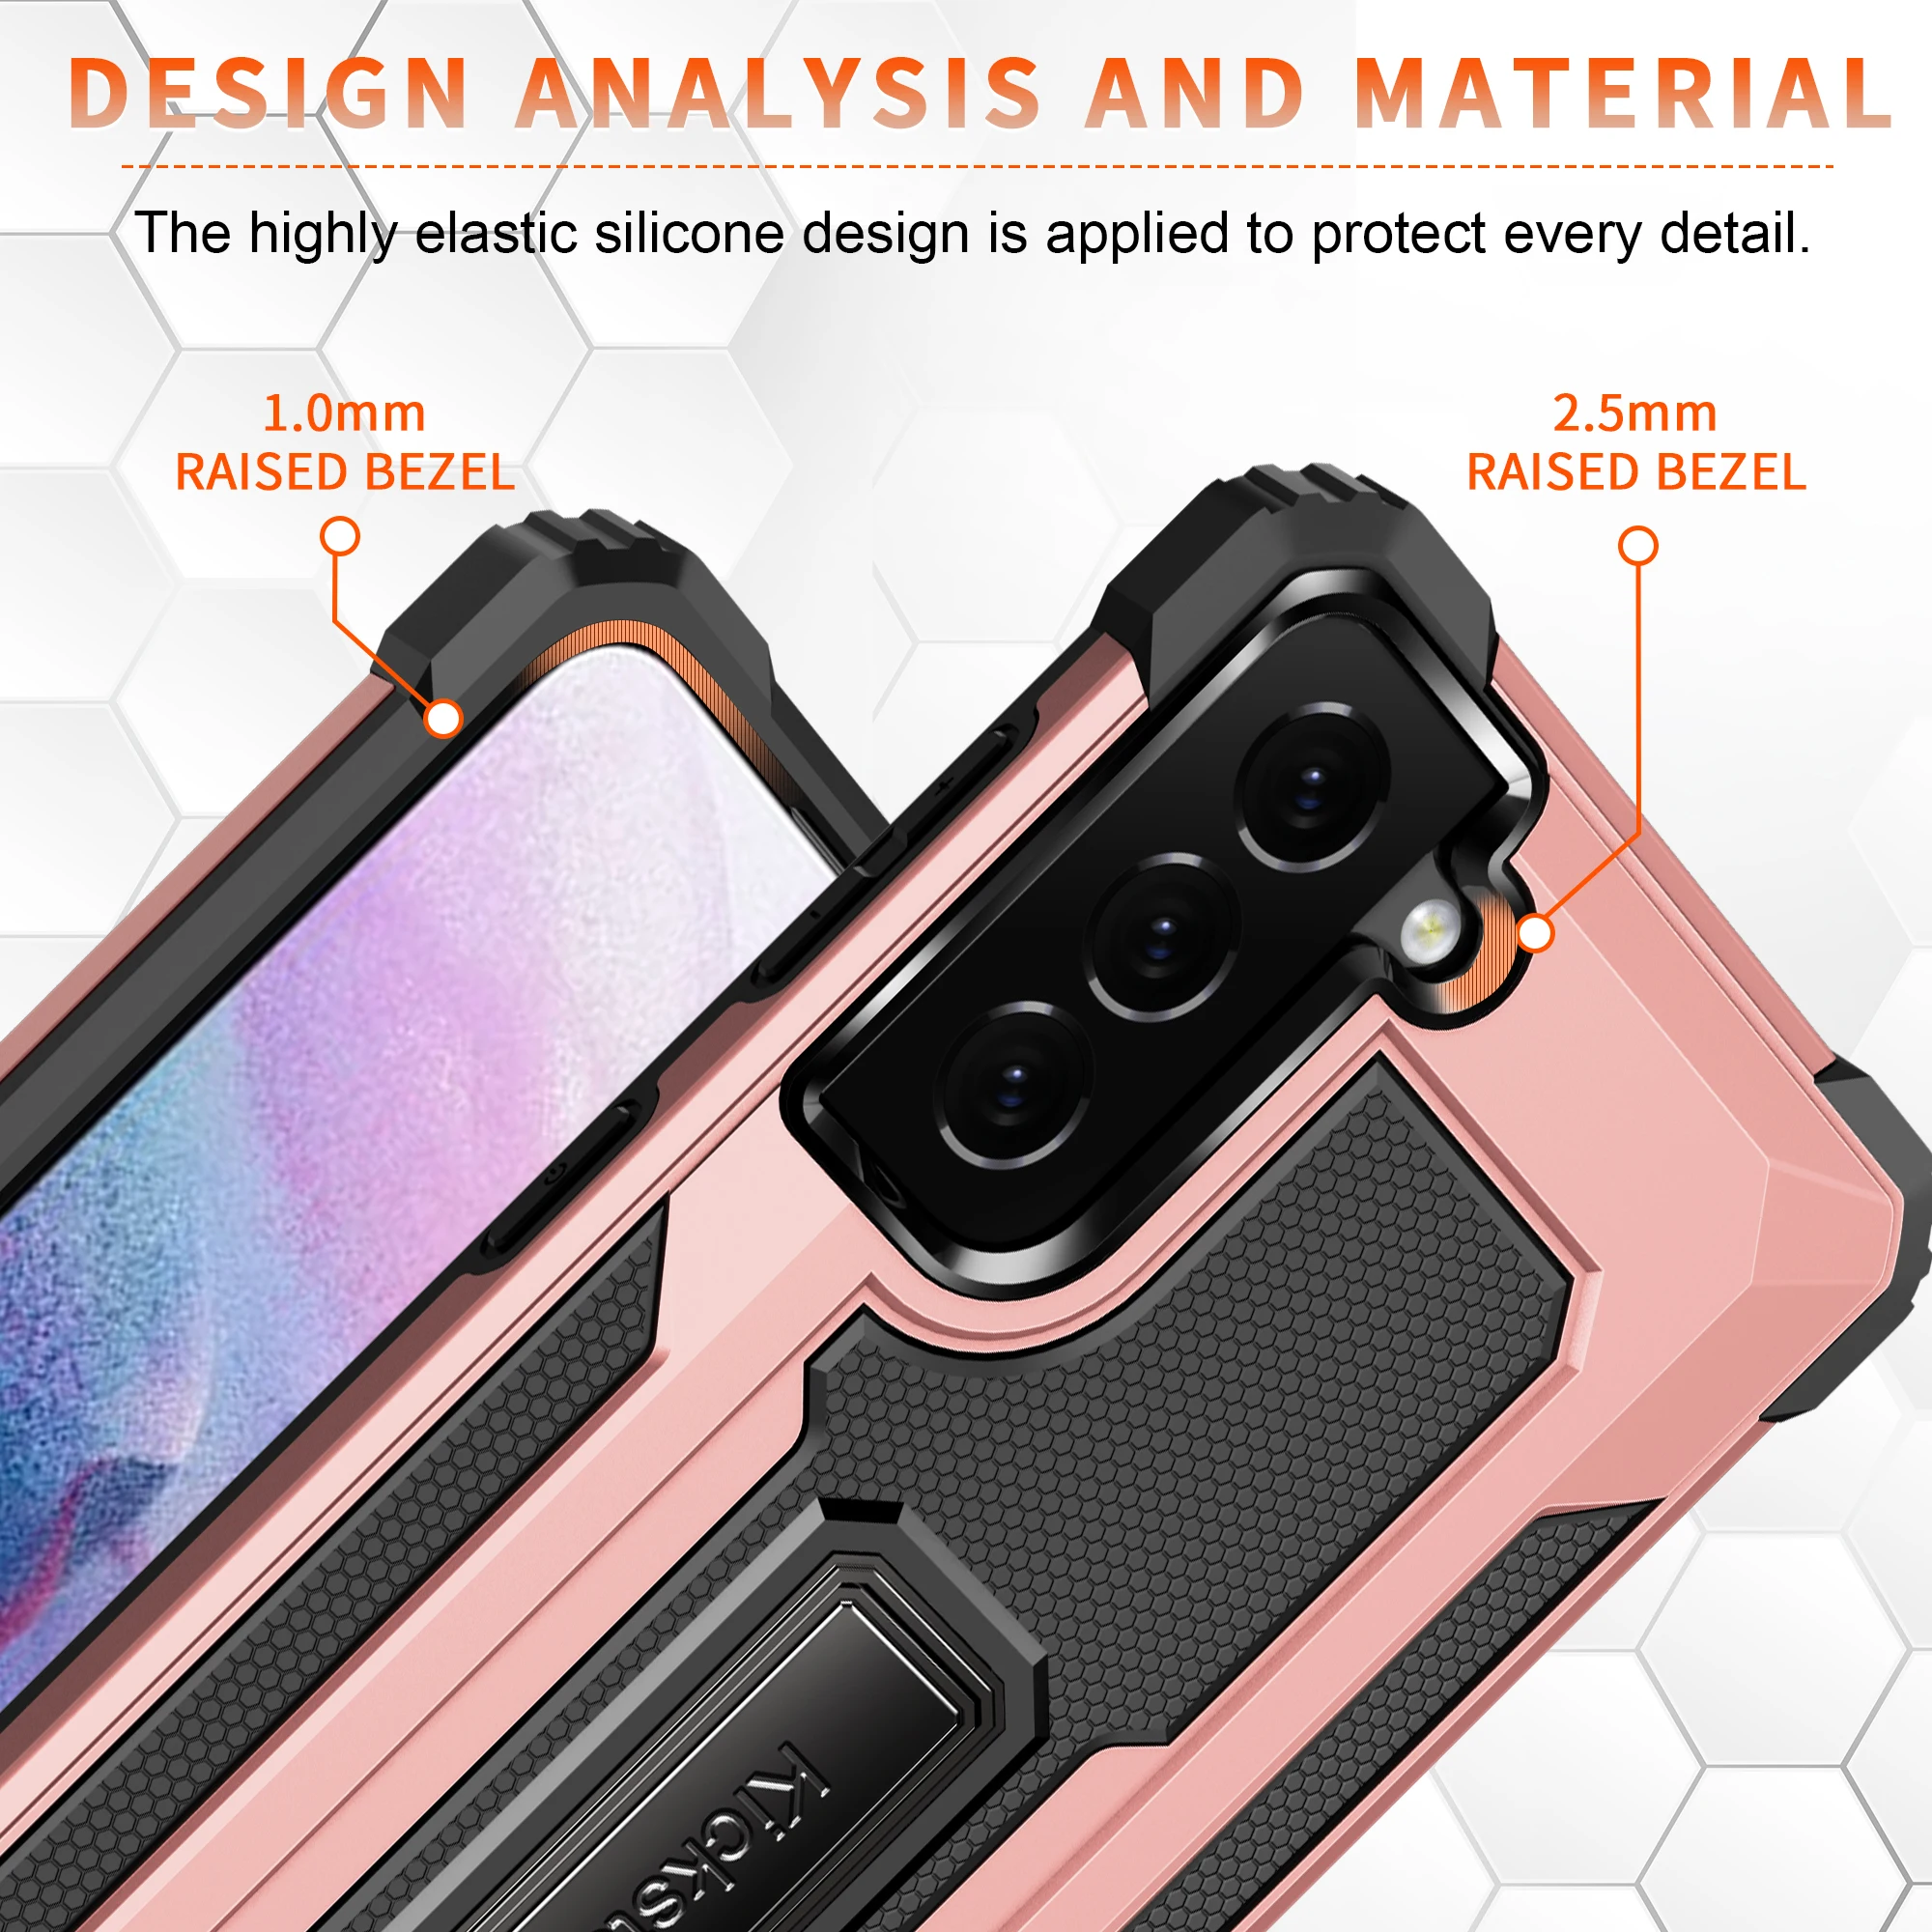 

Rugged Armor Four Corners Phone Case For Samsung Galaxy A91 A71 A51 A31 A21 A11 A21S 4G 5G Shockproof Metal Stand Protector Case